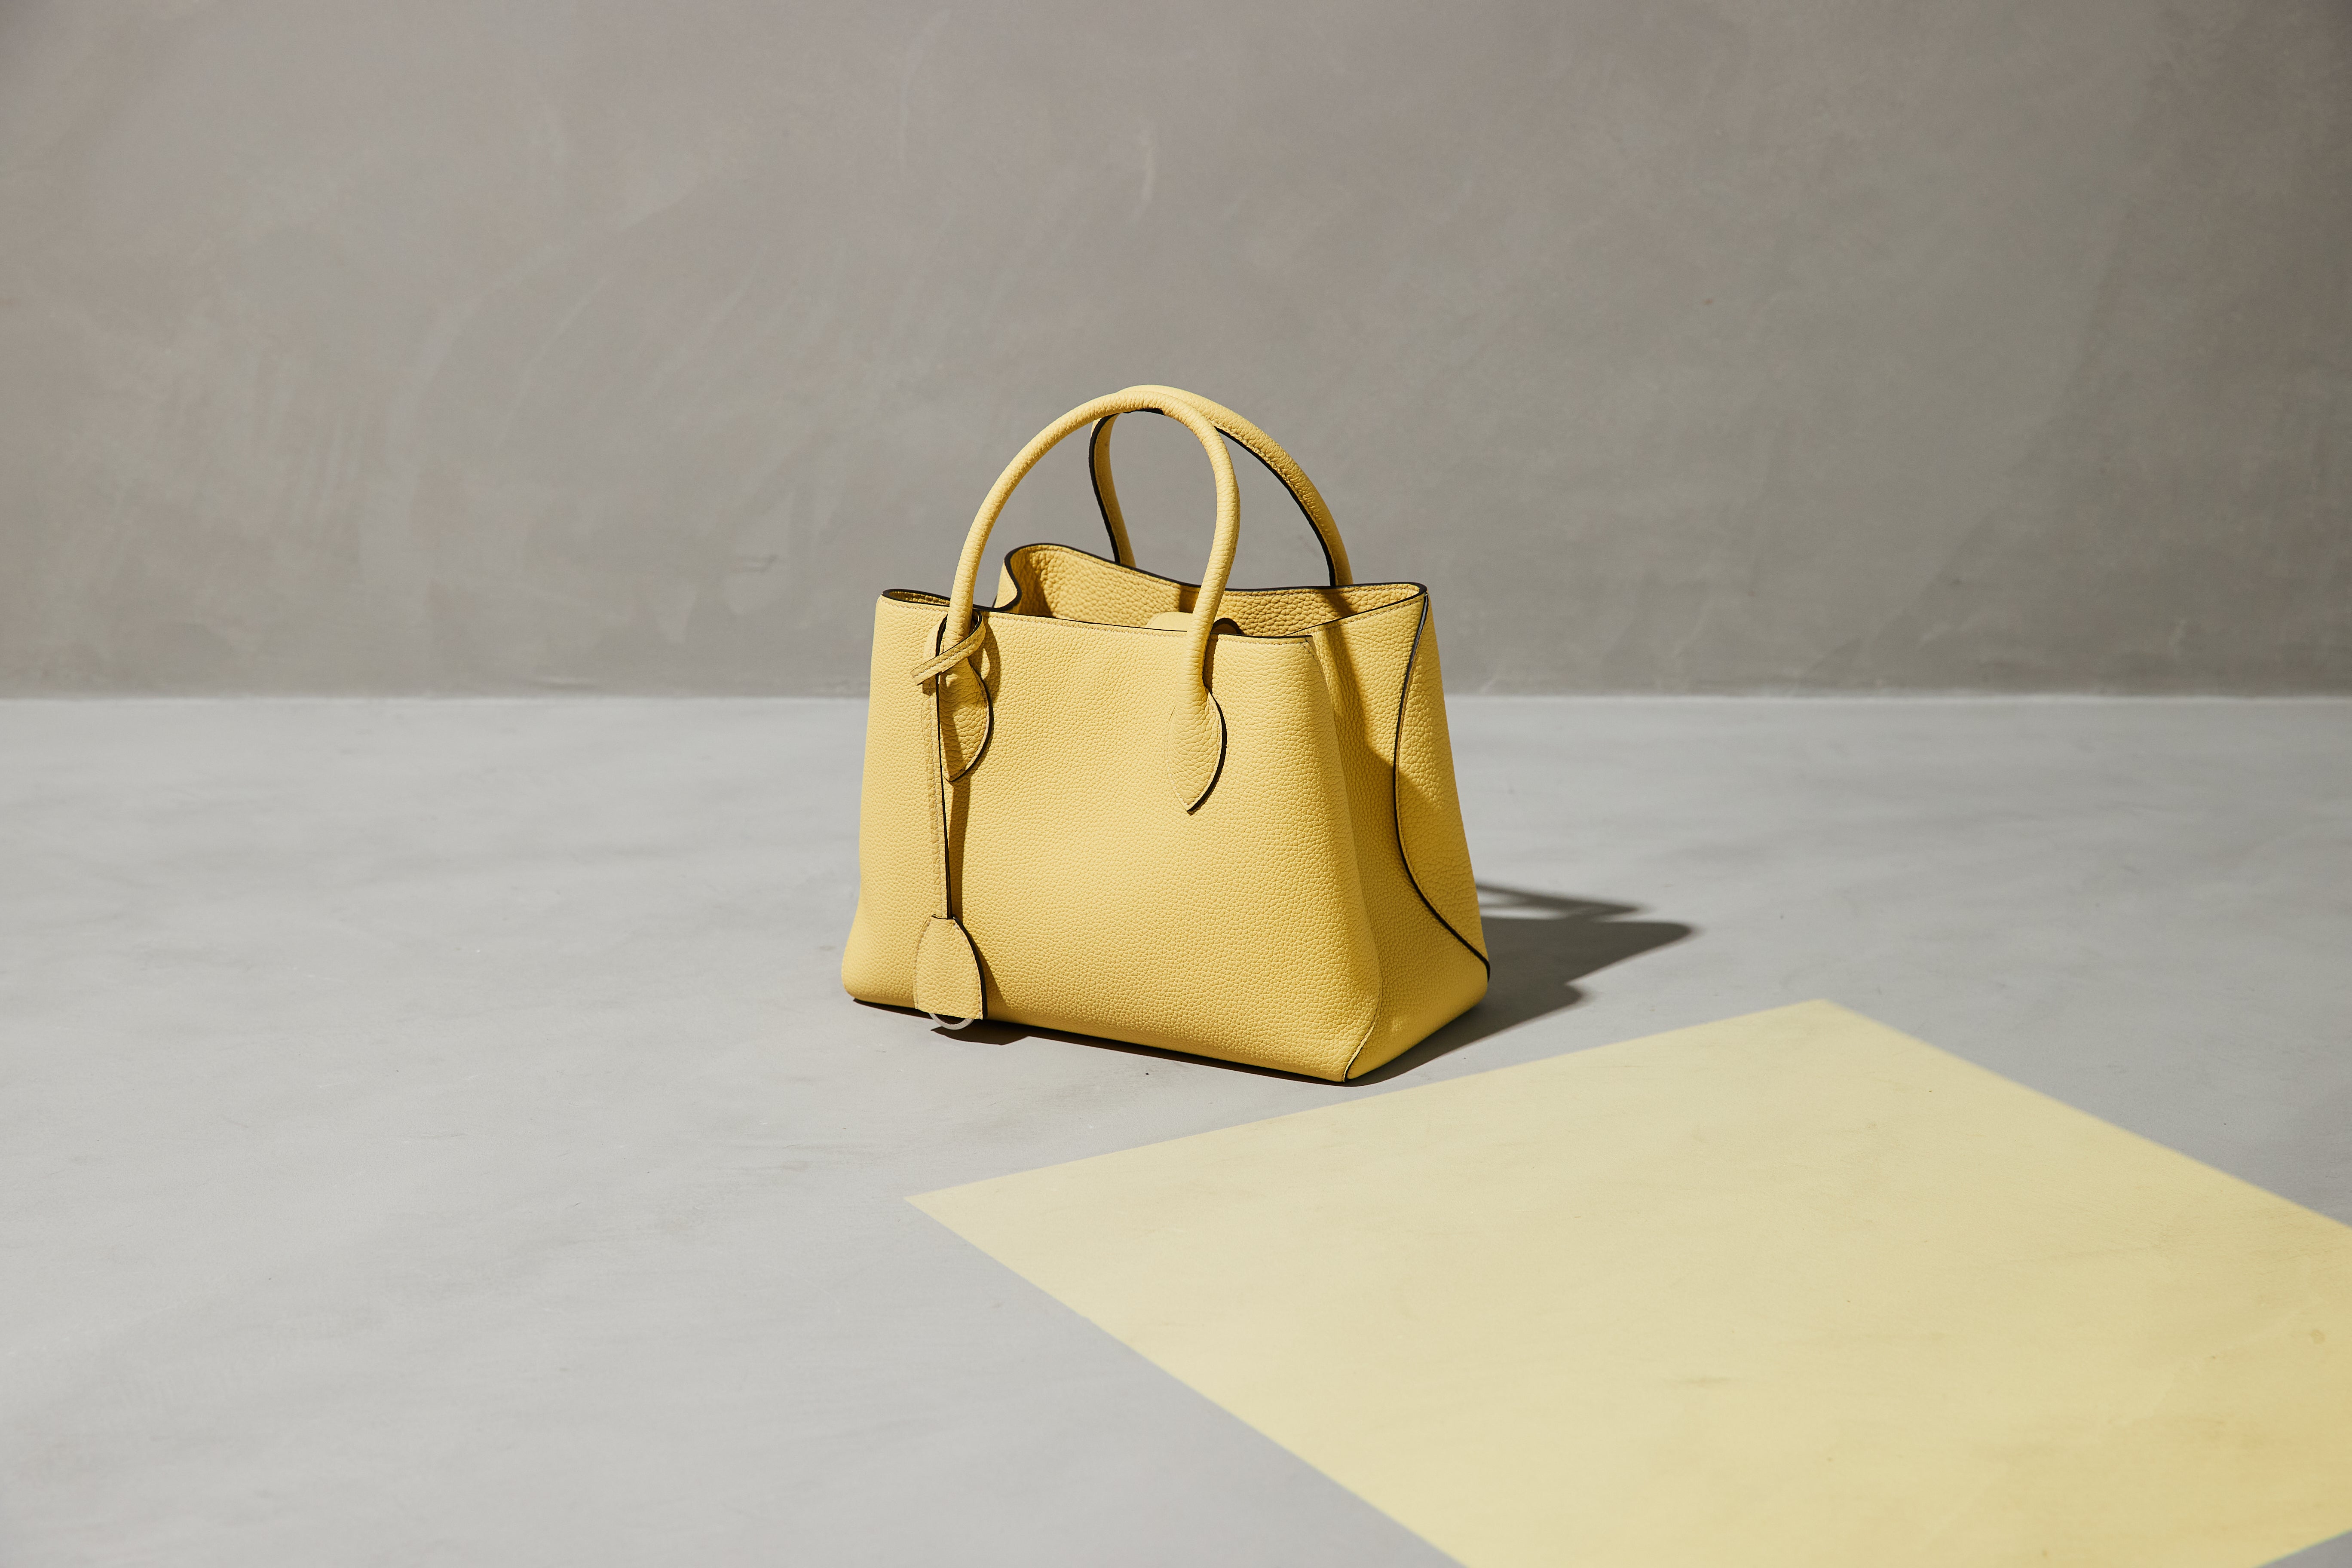 Know 5 Handbag Colors That Go With Everything – M.I.L.A. made in Los Angeles